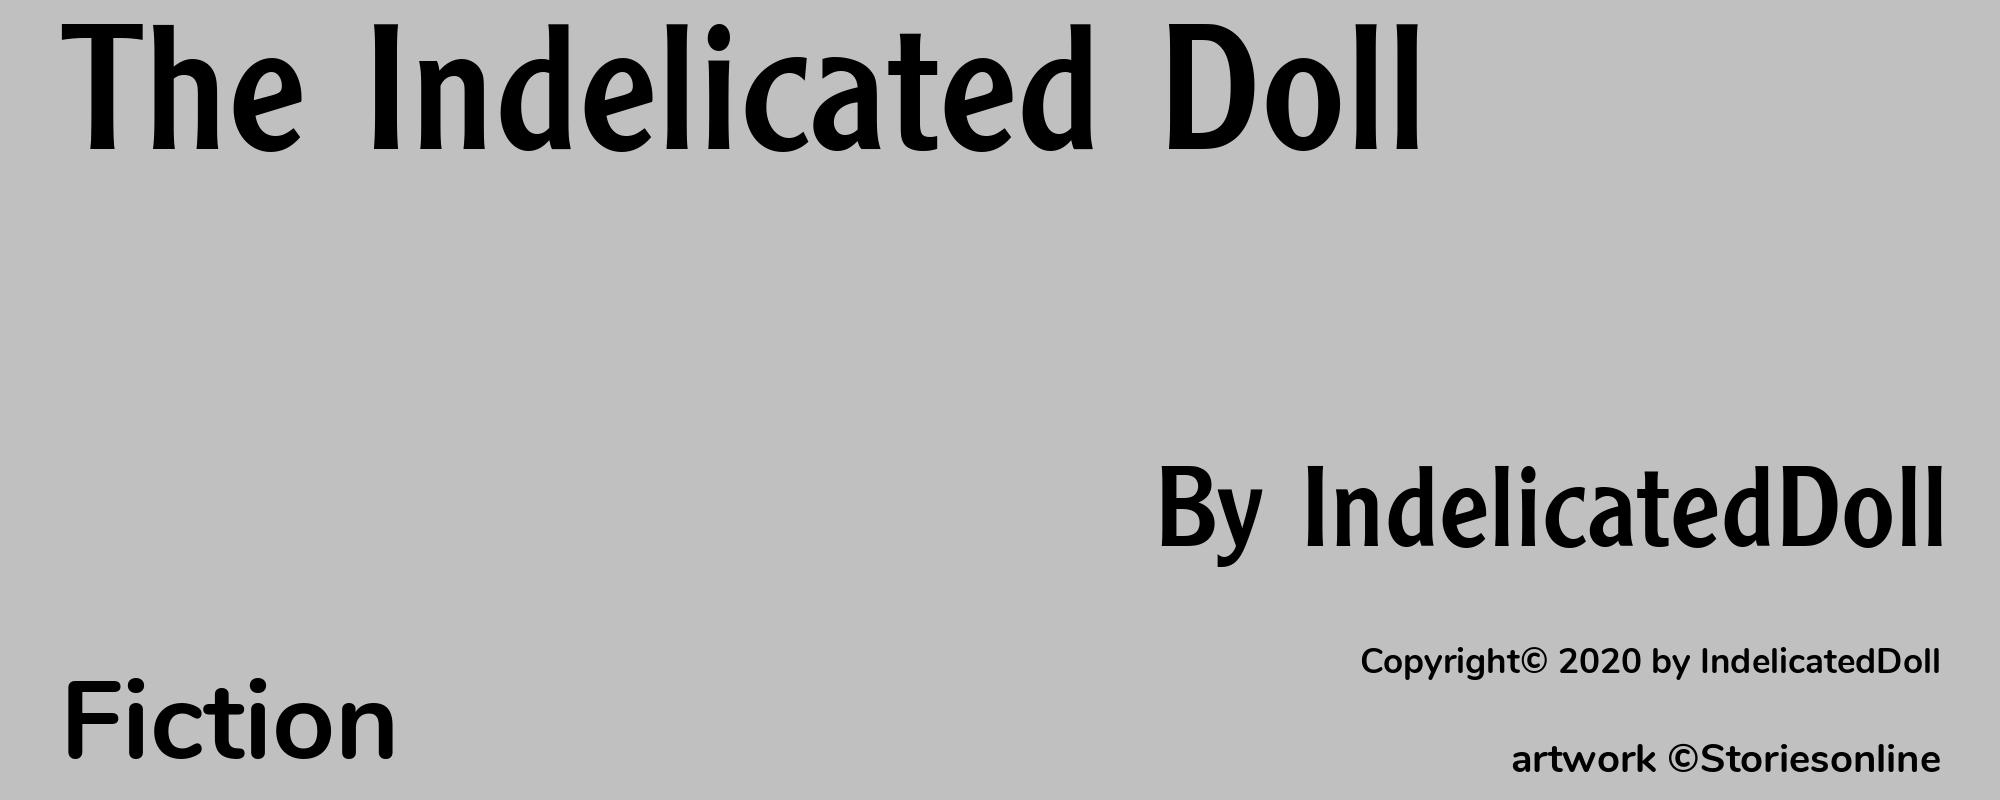 The Indelicated Doll - Cover